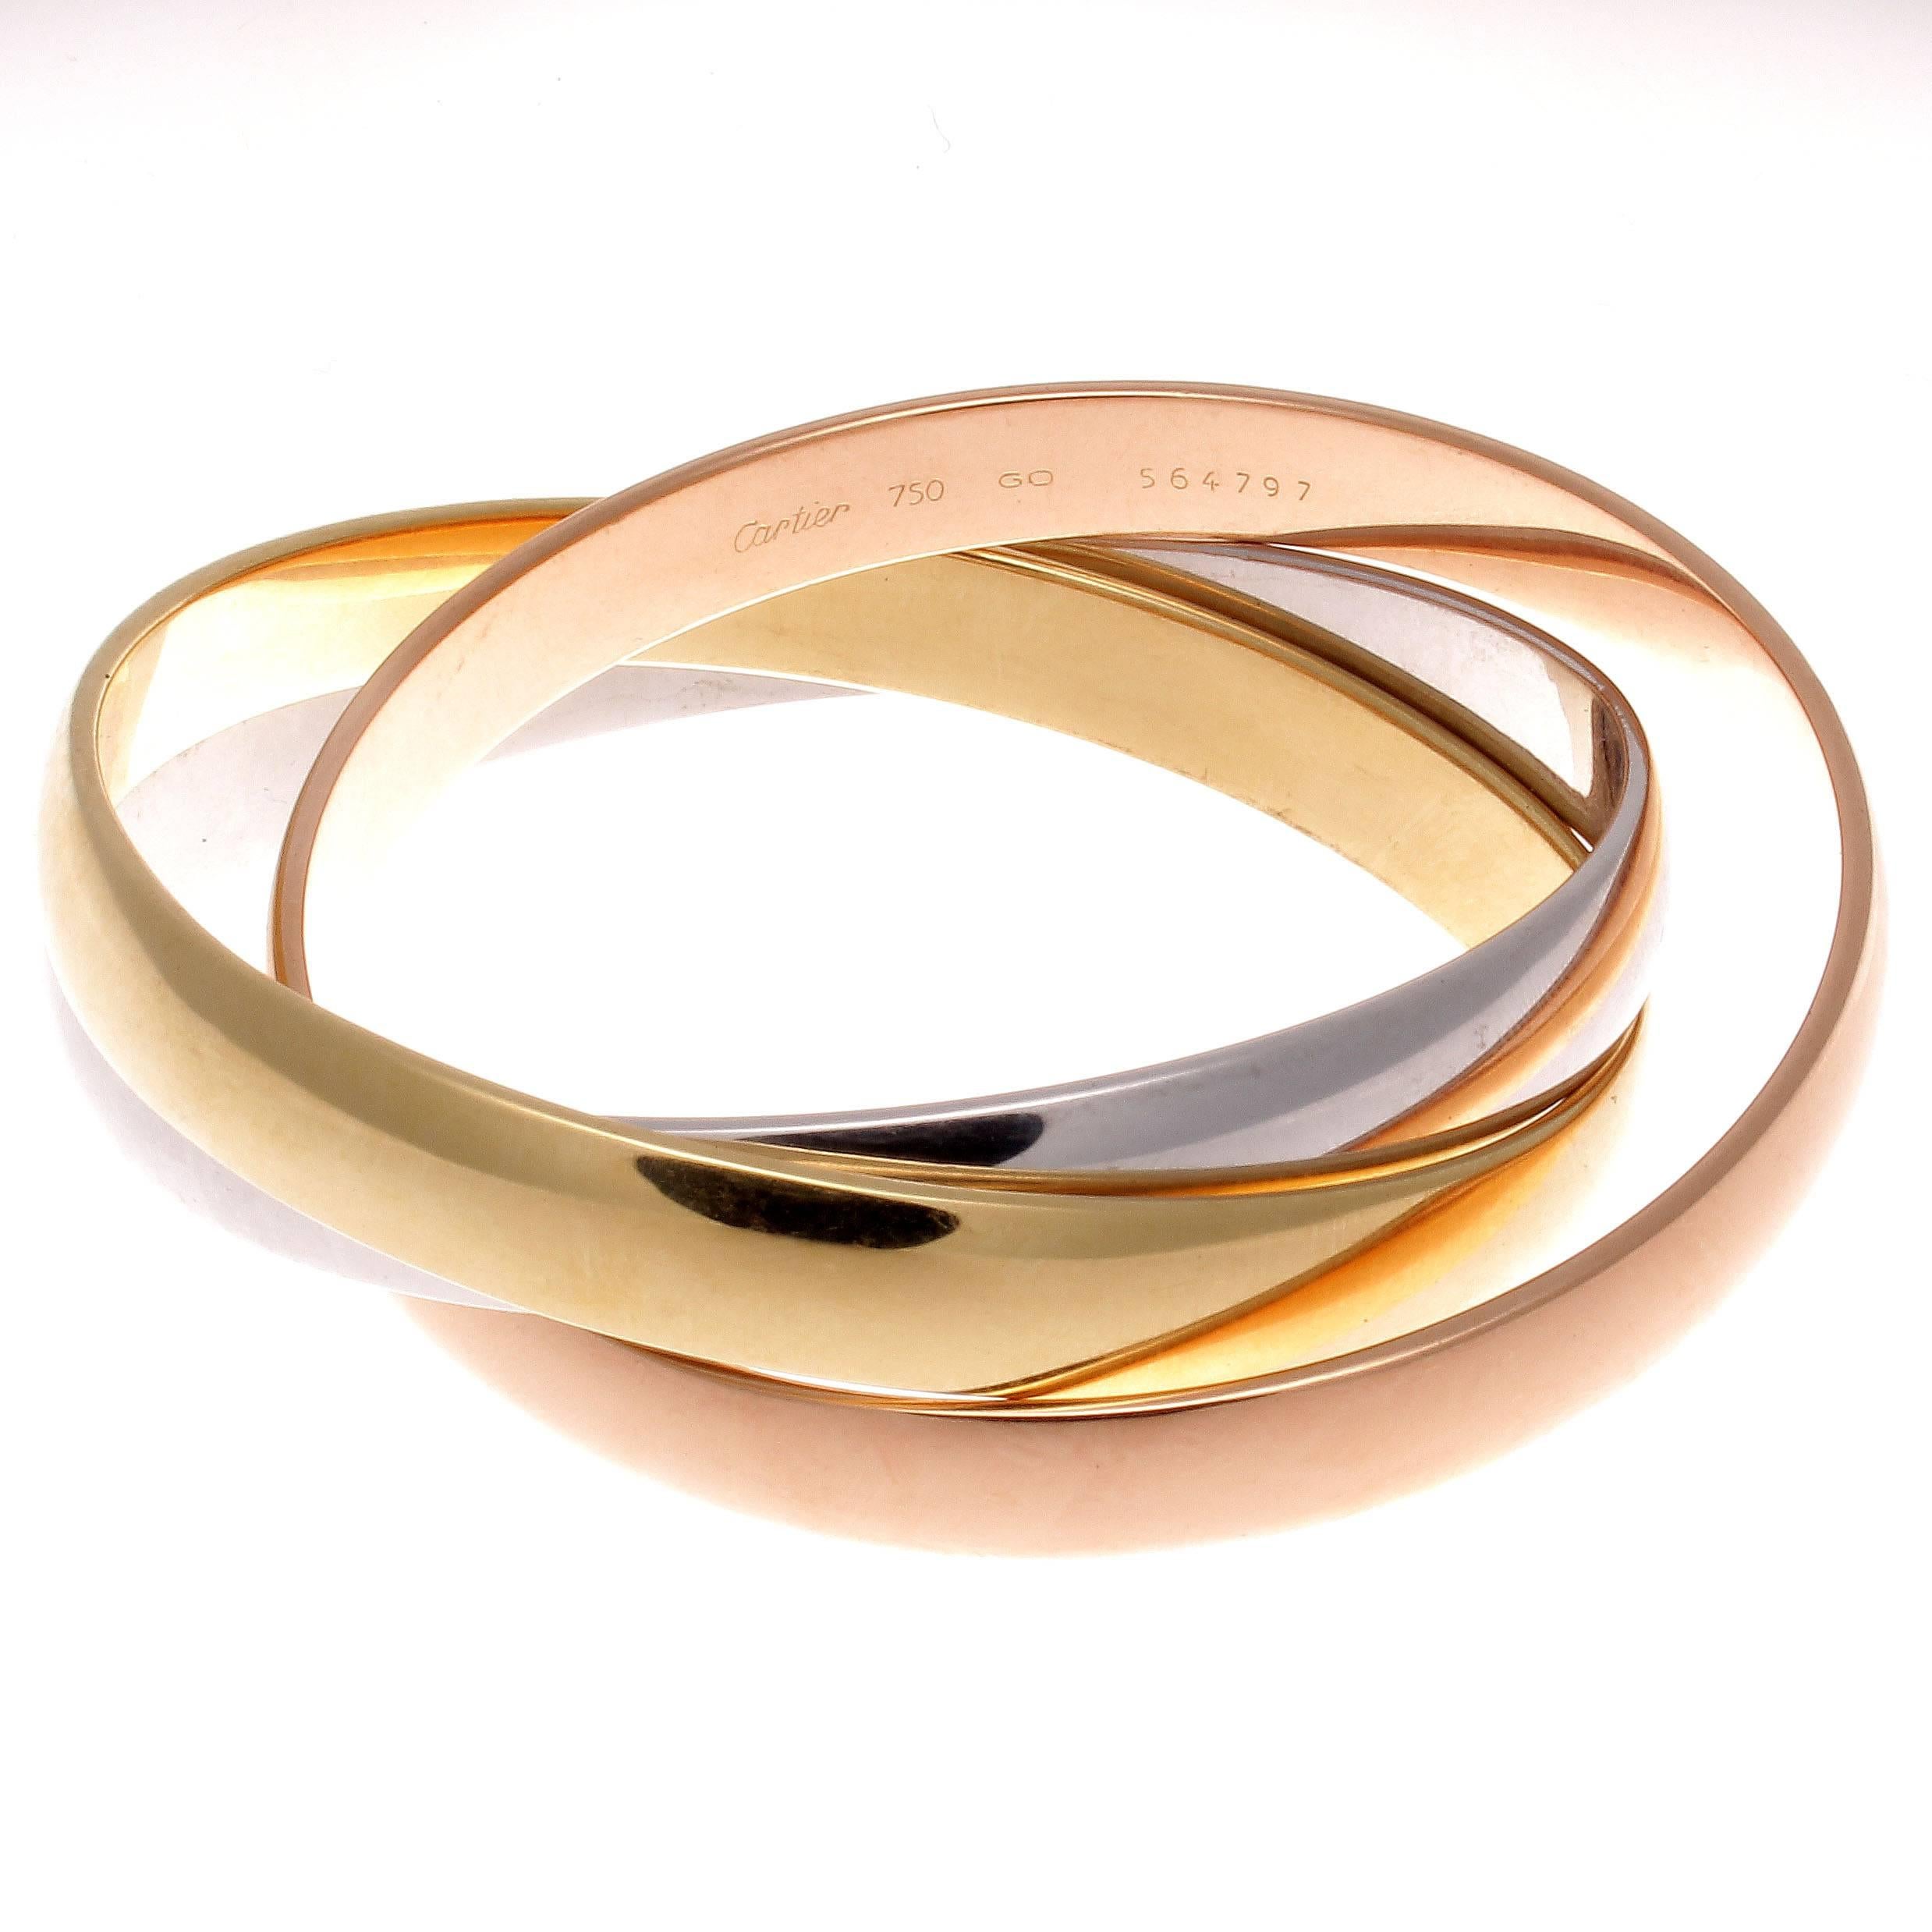 A timeless celestial design from Cartier. Created in the famous tricolor gold: pink gold for love, yellow gold for fidelity and white gold for friendship, intertwined in a display of unity and harmony. The bangle bracelets are designed in 18k,